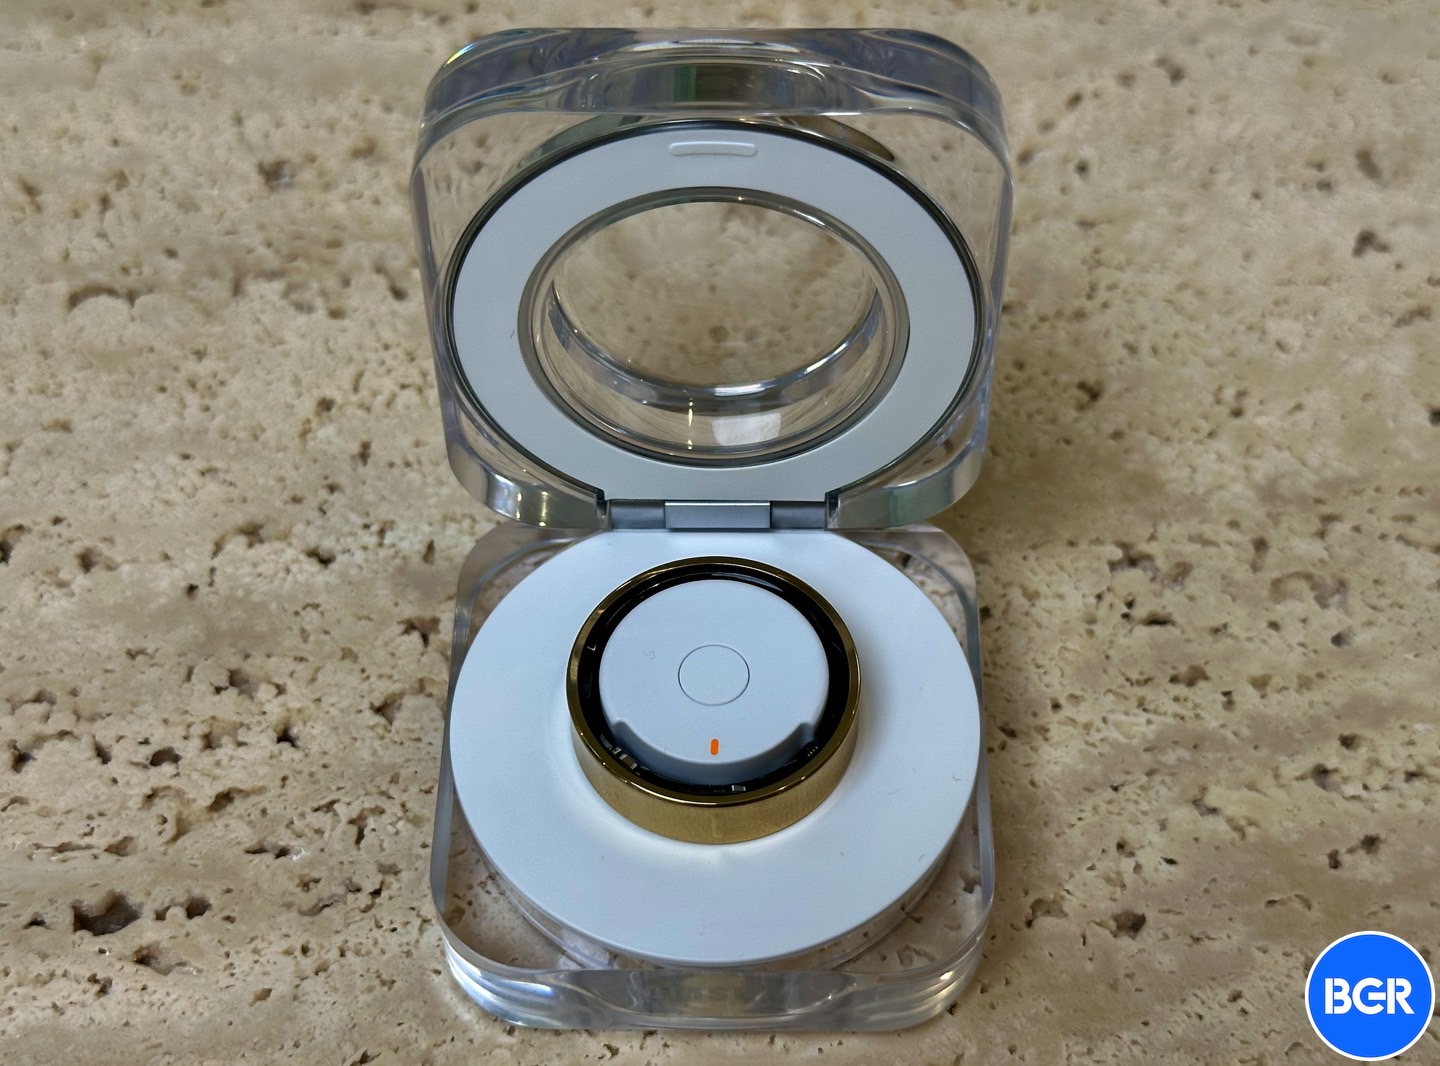 Galaxy Ring comes in a transparent box, which also acts as the charger.